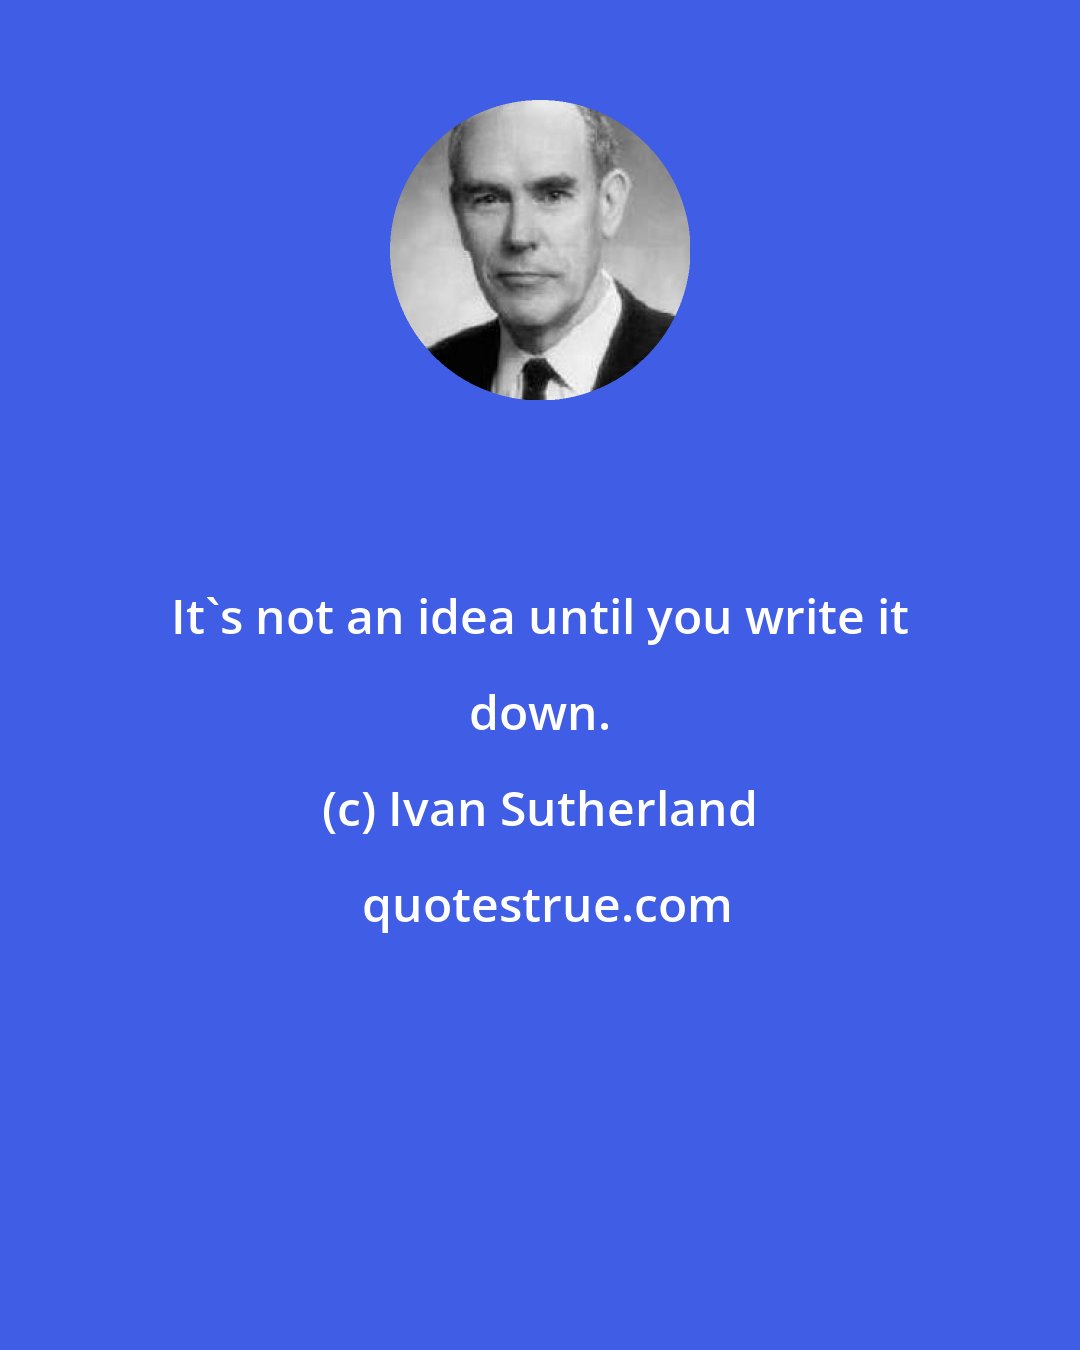 Ivan Sutherland: It's not an idea until you write it down.